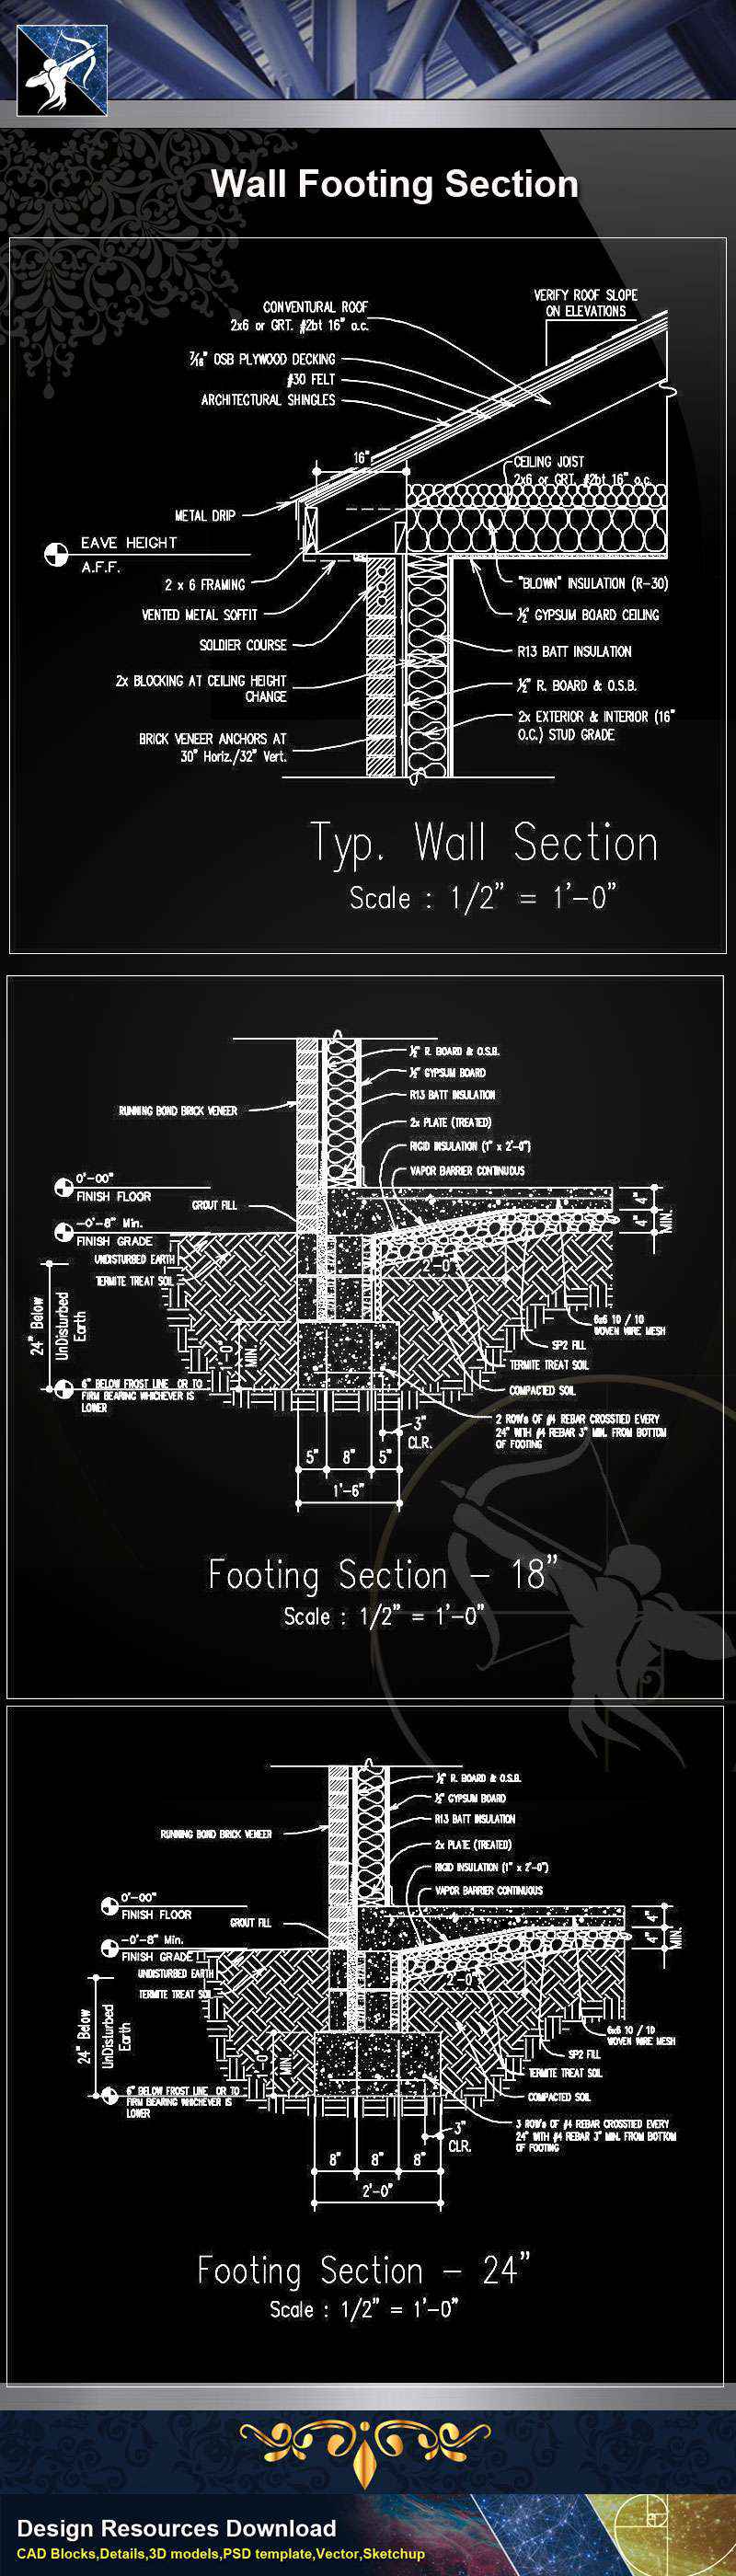 【Architecture CAD Details Collections】Wall Footing Section CAD Details